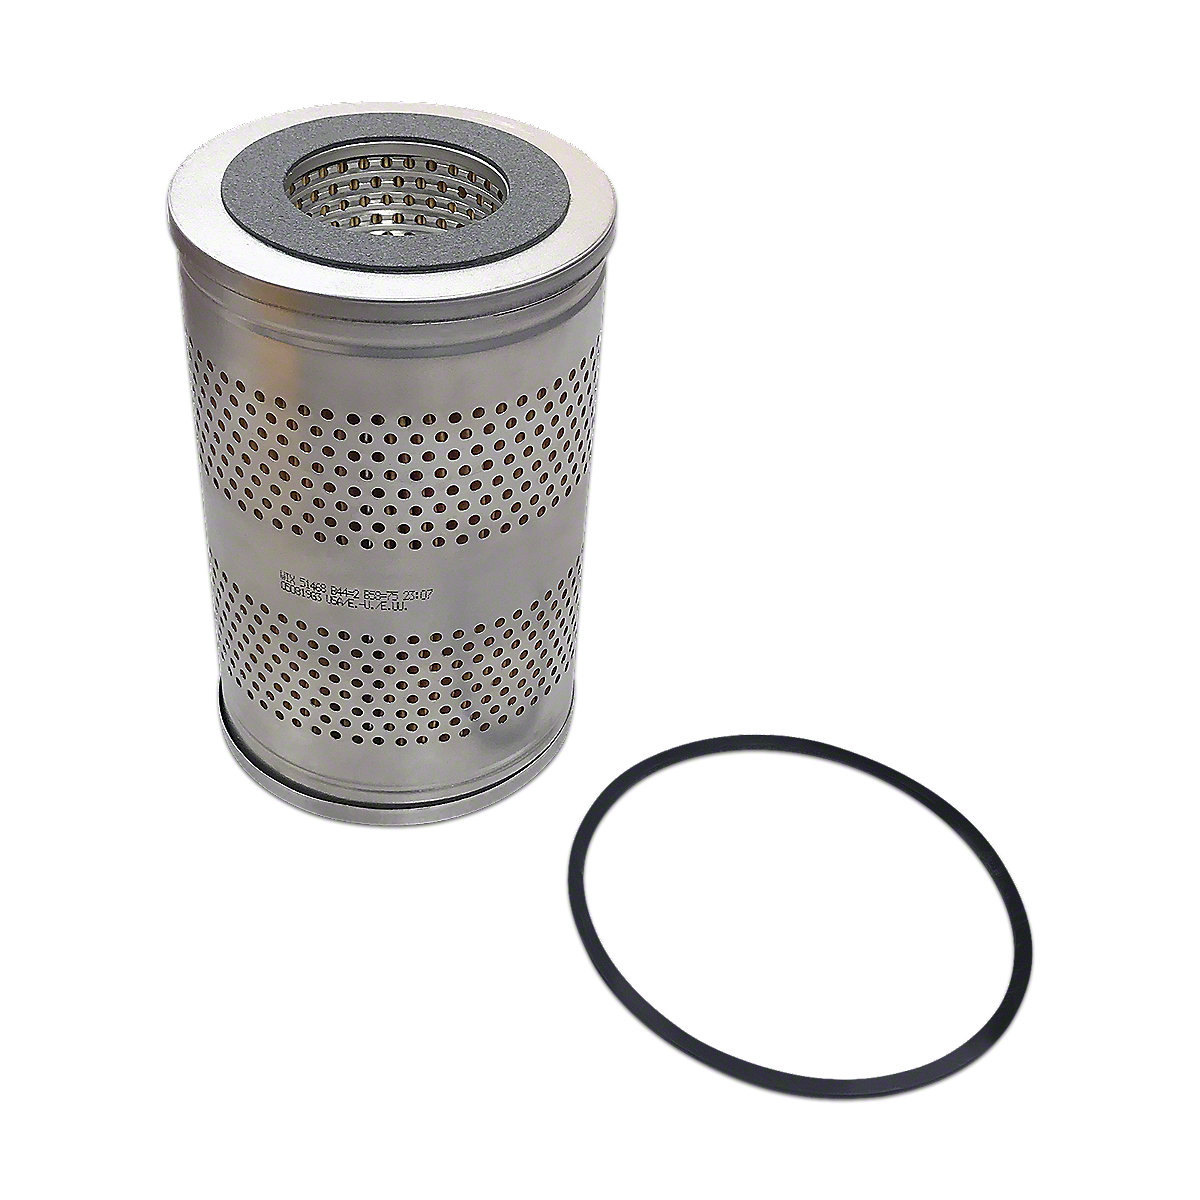 Details about   ABC4535 Hydraulic Filter Fits Case 